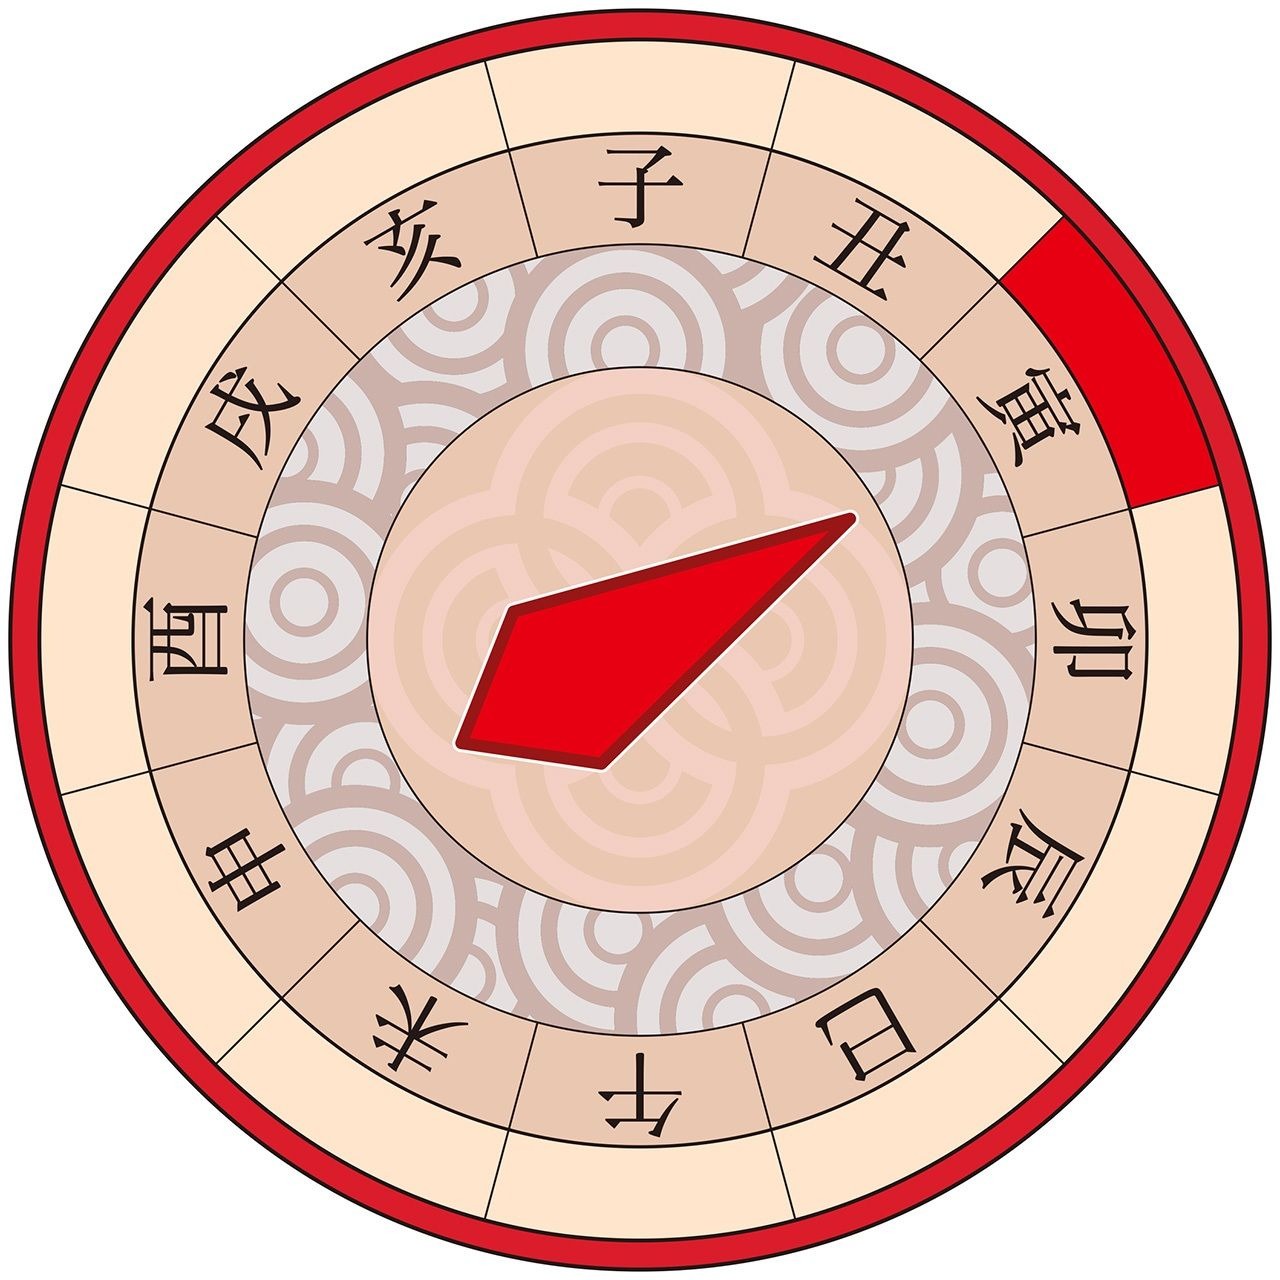 Kanji for the 12 eto line up in order around a circle. Clockwise from the top, they represent the rat, ox, tiger, rabbit, dragon, snake, horse, sheep, monkey, rooster, dog, and boar.